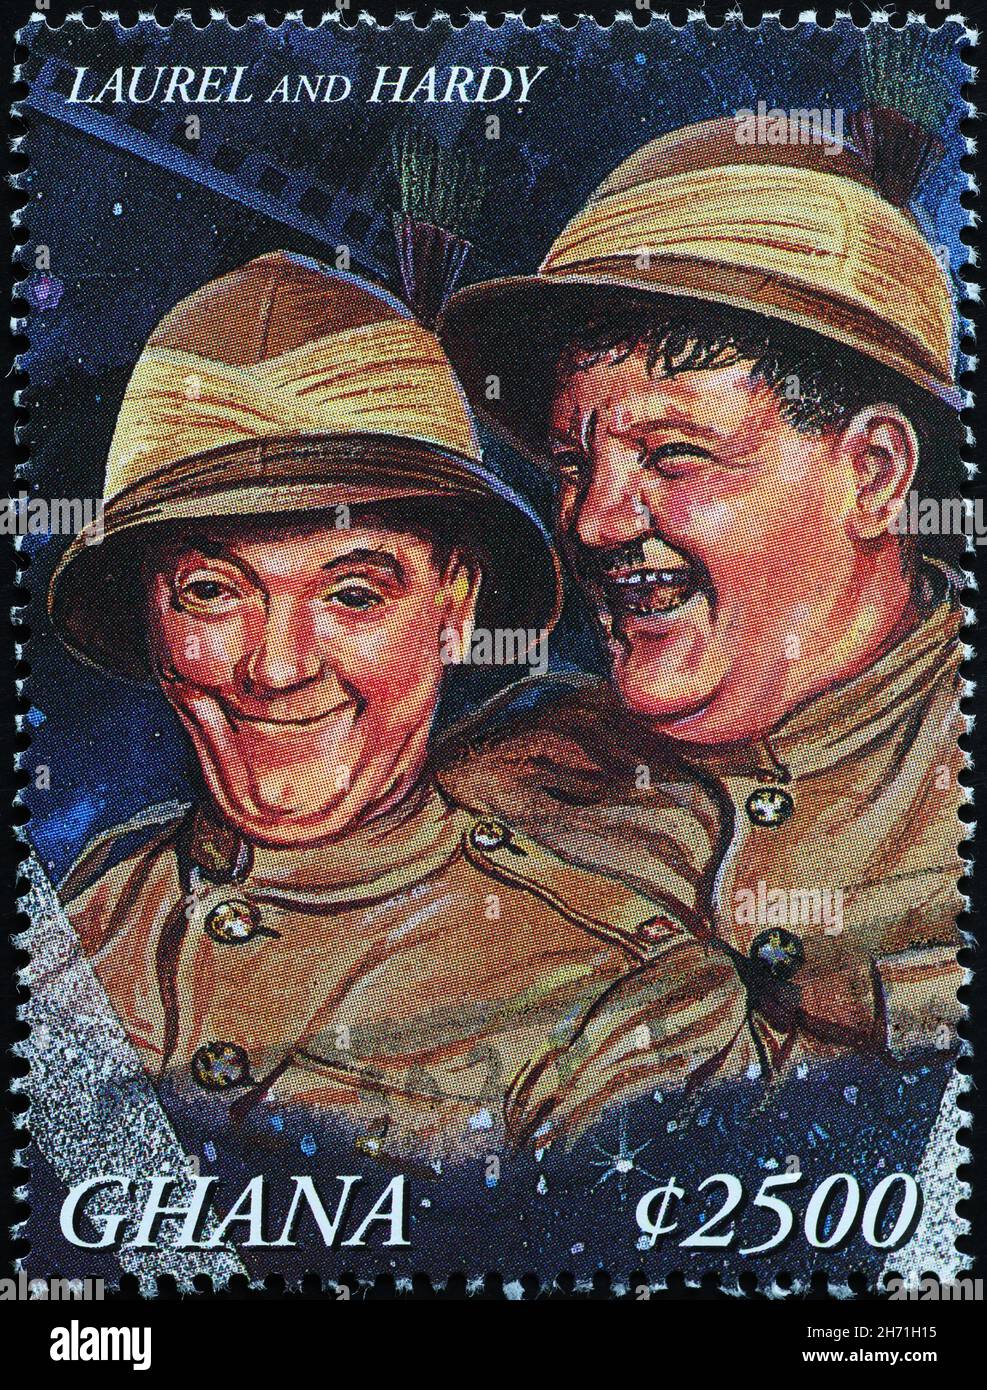 Stan Laurel and Oliver Hardy portrait on stamp Stock Photo